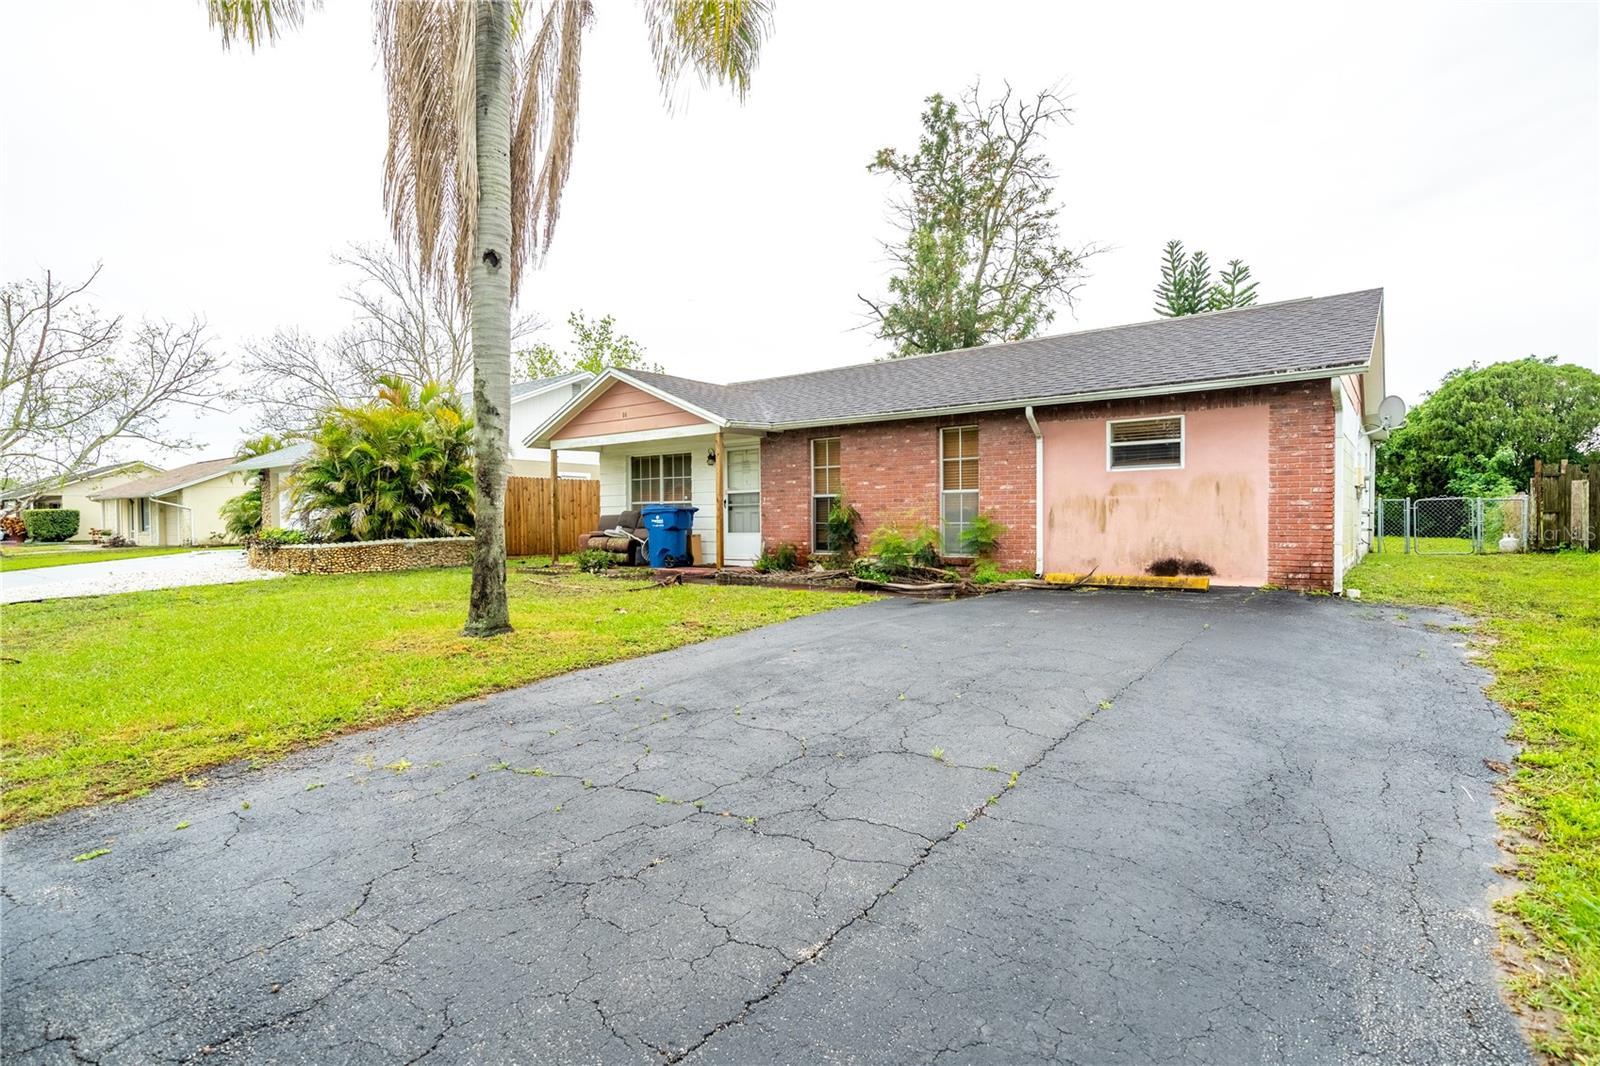 Photo one of 7400 Mitchell Ranch Rd New Port Richey FL 34655 | MLS O6193432